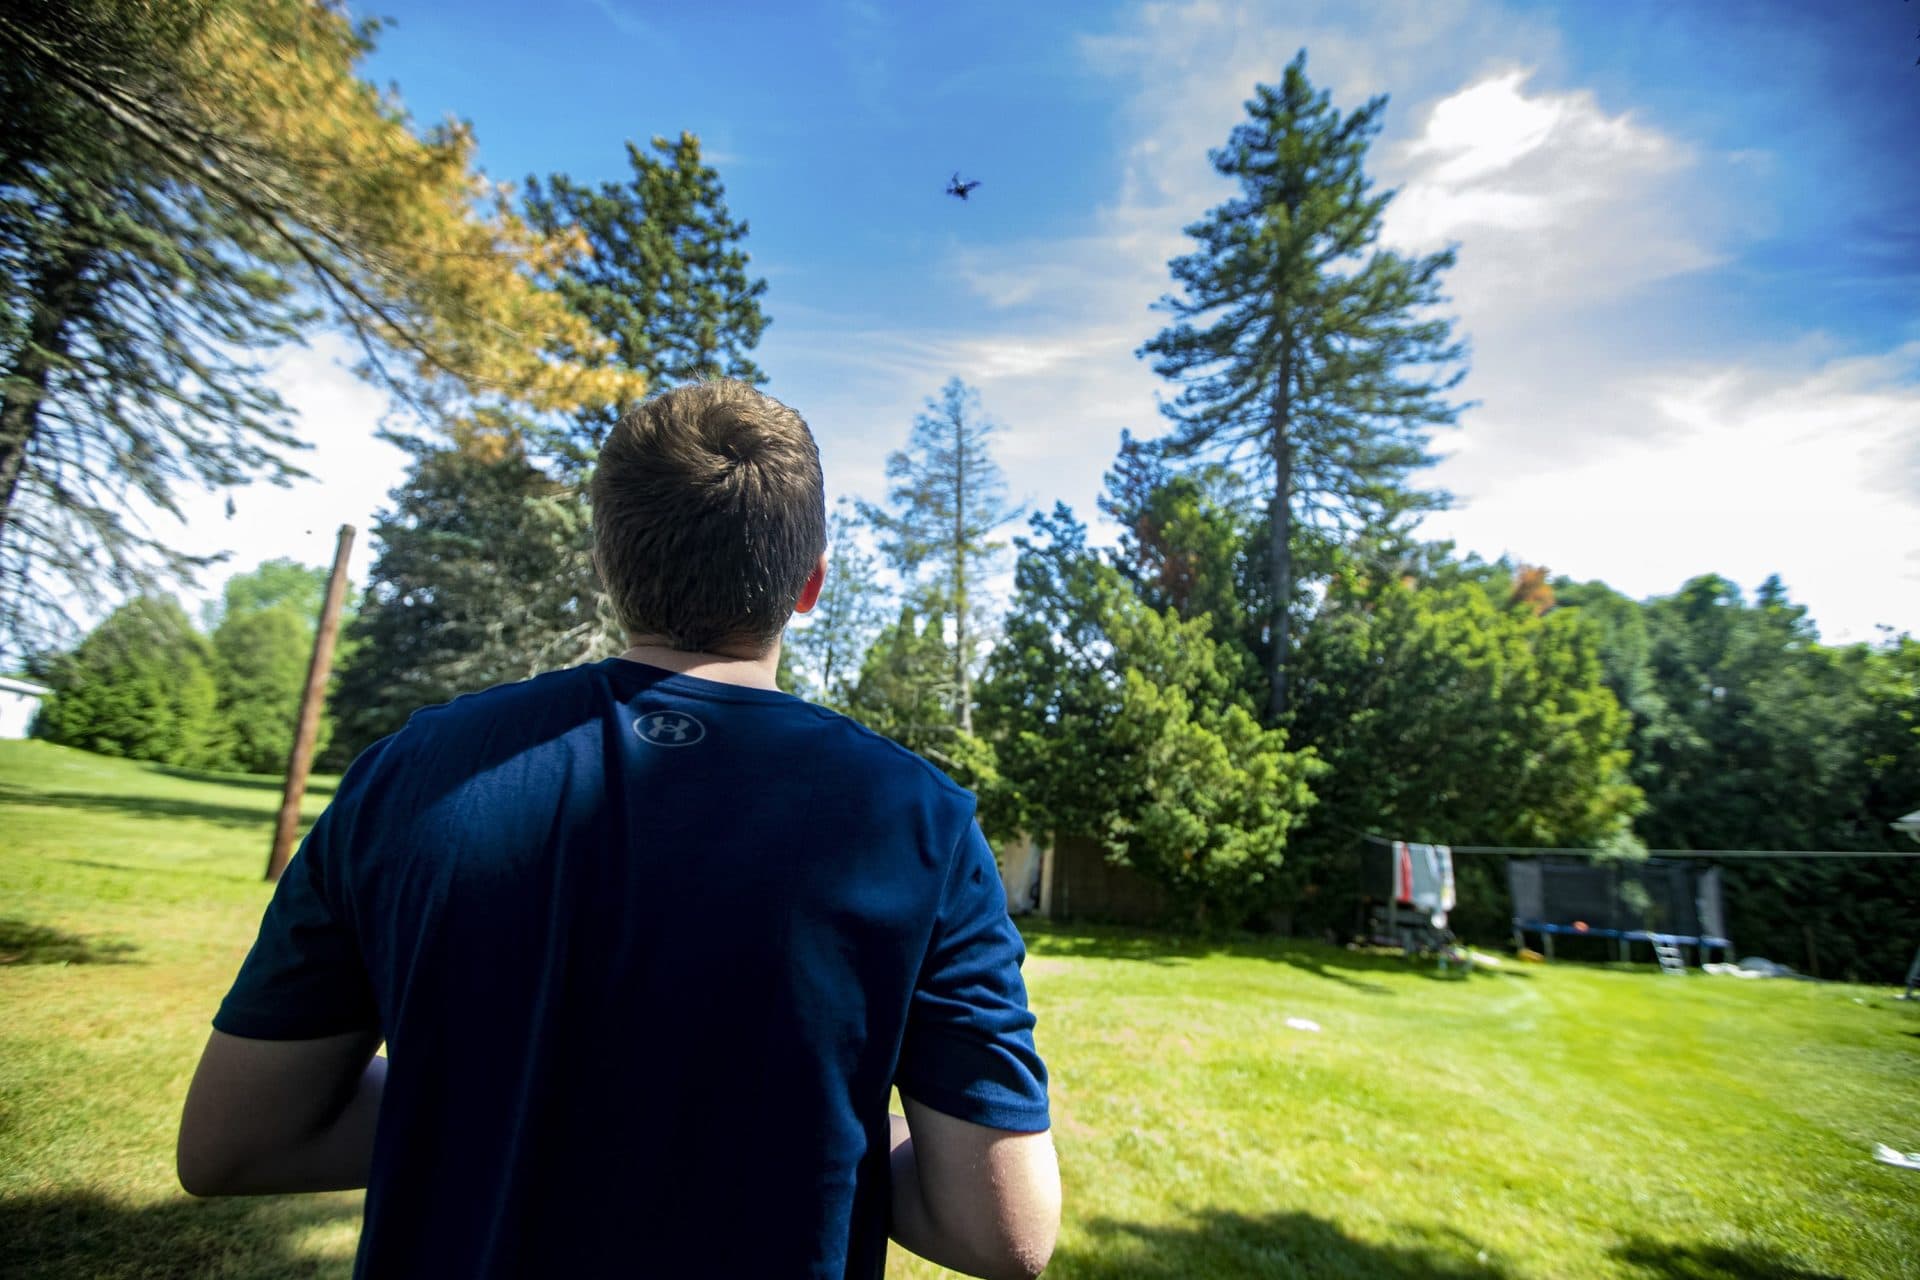 Charlie, 12, flies a drone in the backyard of his home in West Springfield. (Jesse Costa/WBUR)